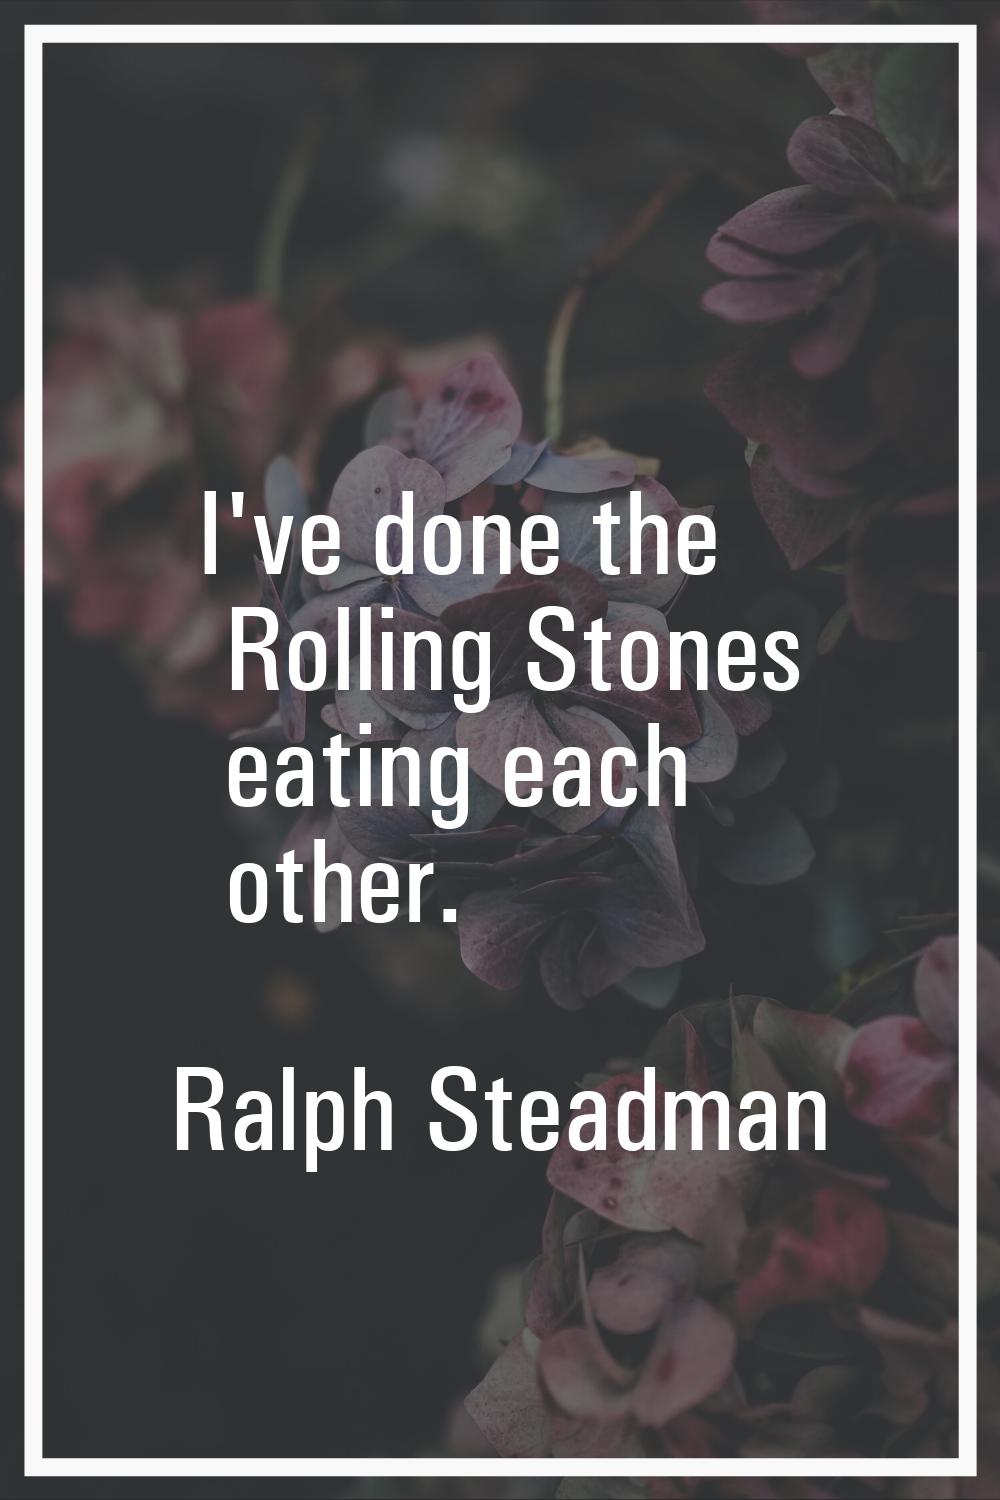 I've done the Rolling Stones eating each other.